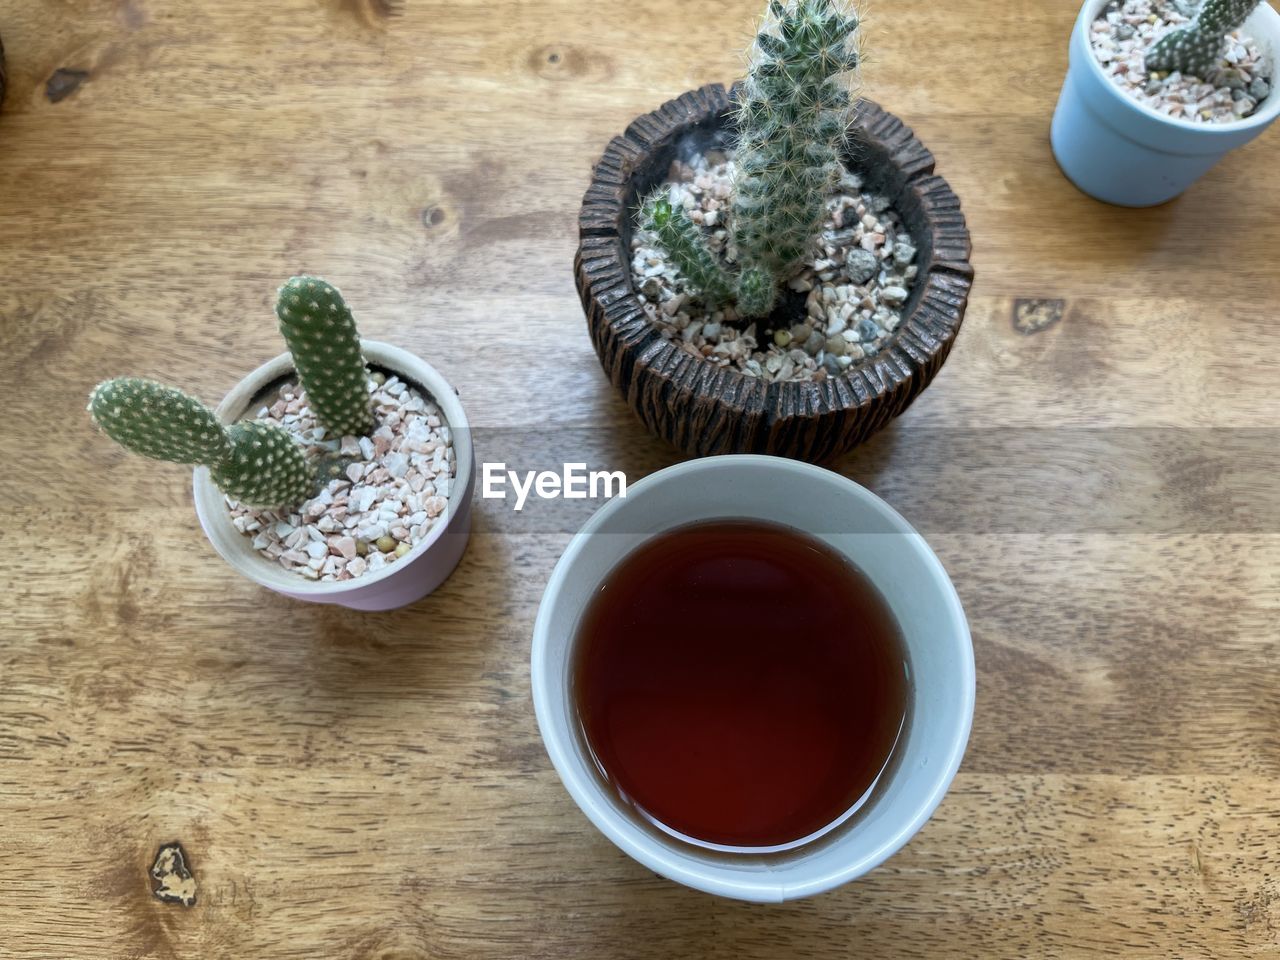 HIGH ANGLE VIEW OF TEA CUP AND CACTUS ON TABLE